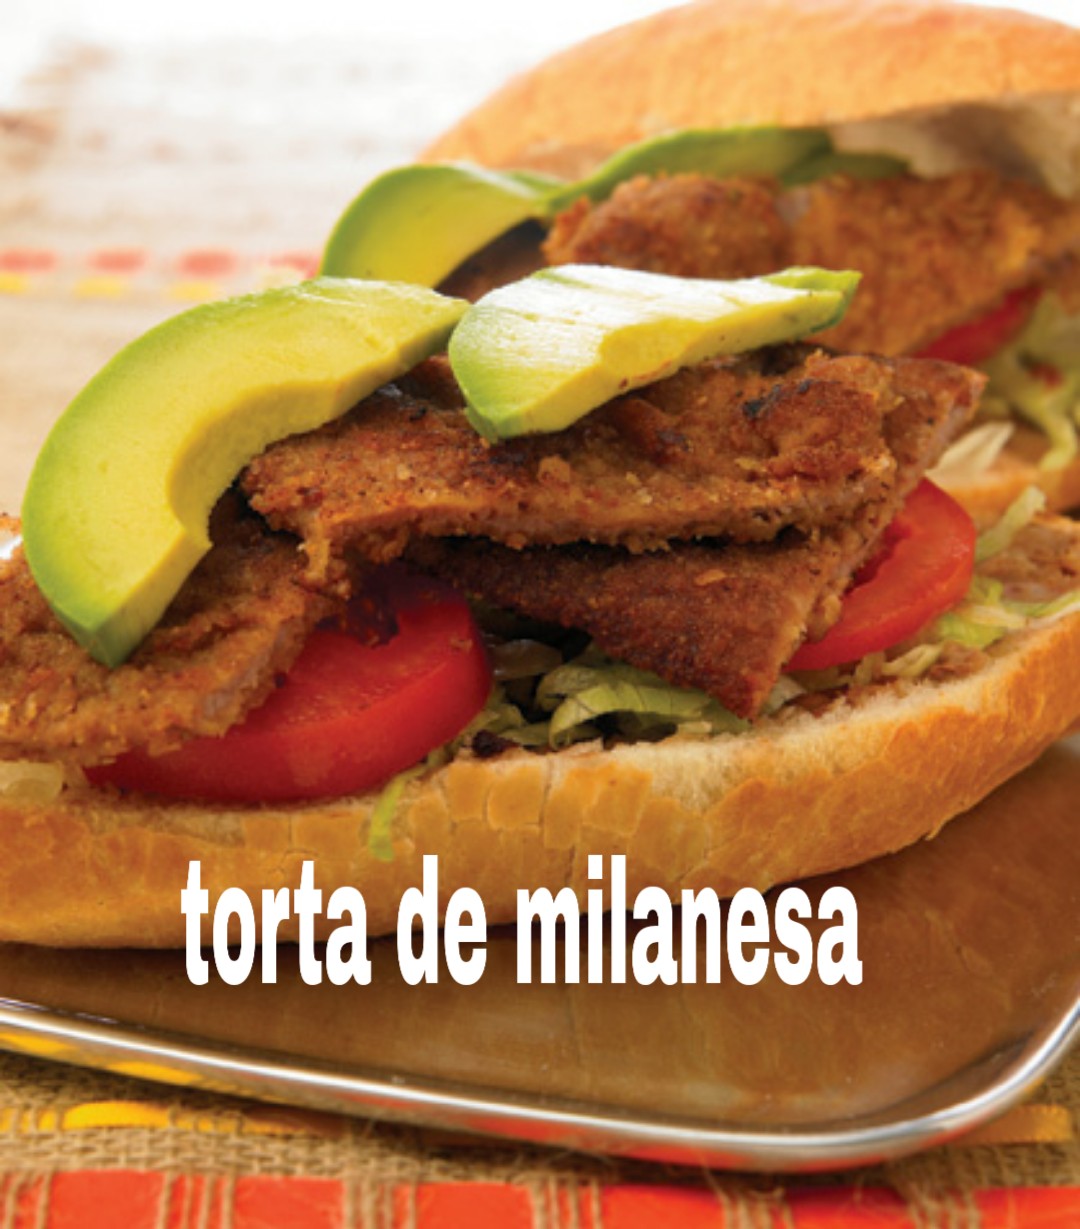 Torta De Milanesa Near Me : Order delivery from manny's ...